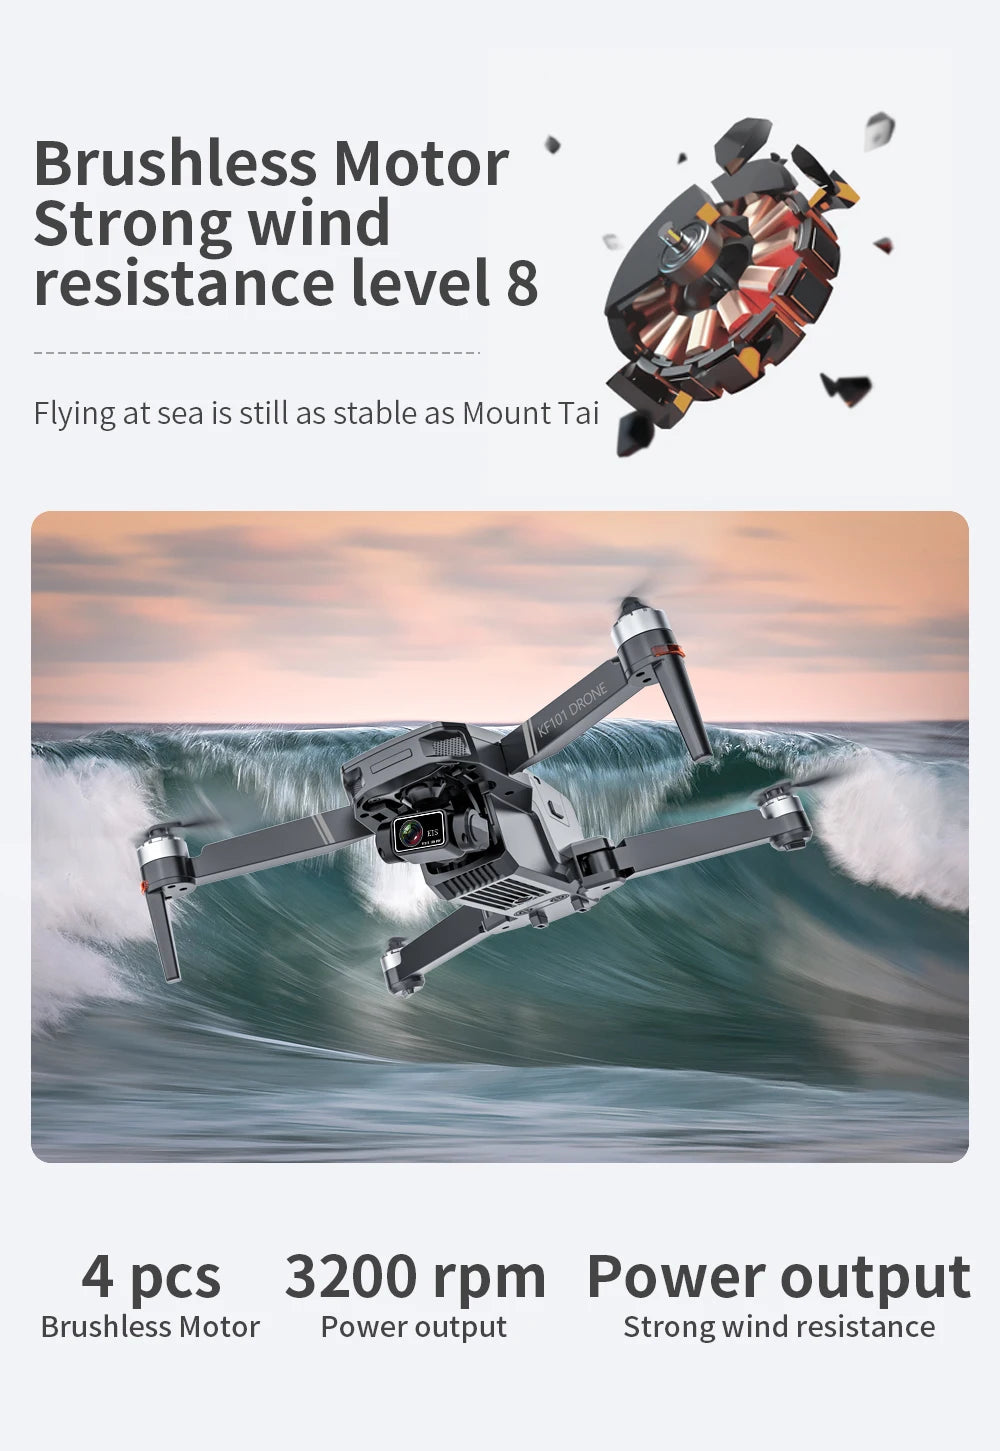 New GPS Drone, Brushless Motor wind sesistance level 8 Flying at sea is still as stable as Mount